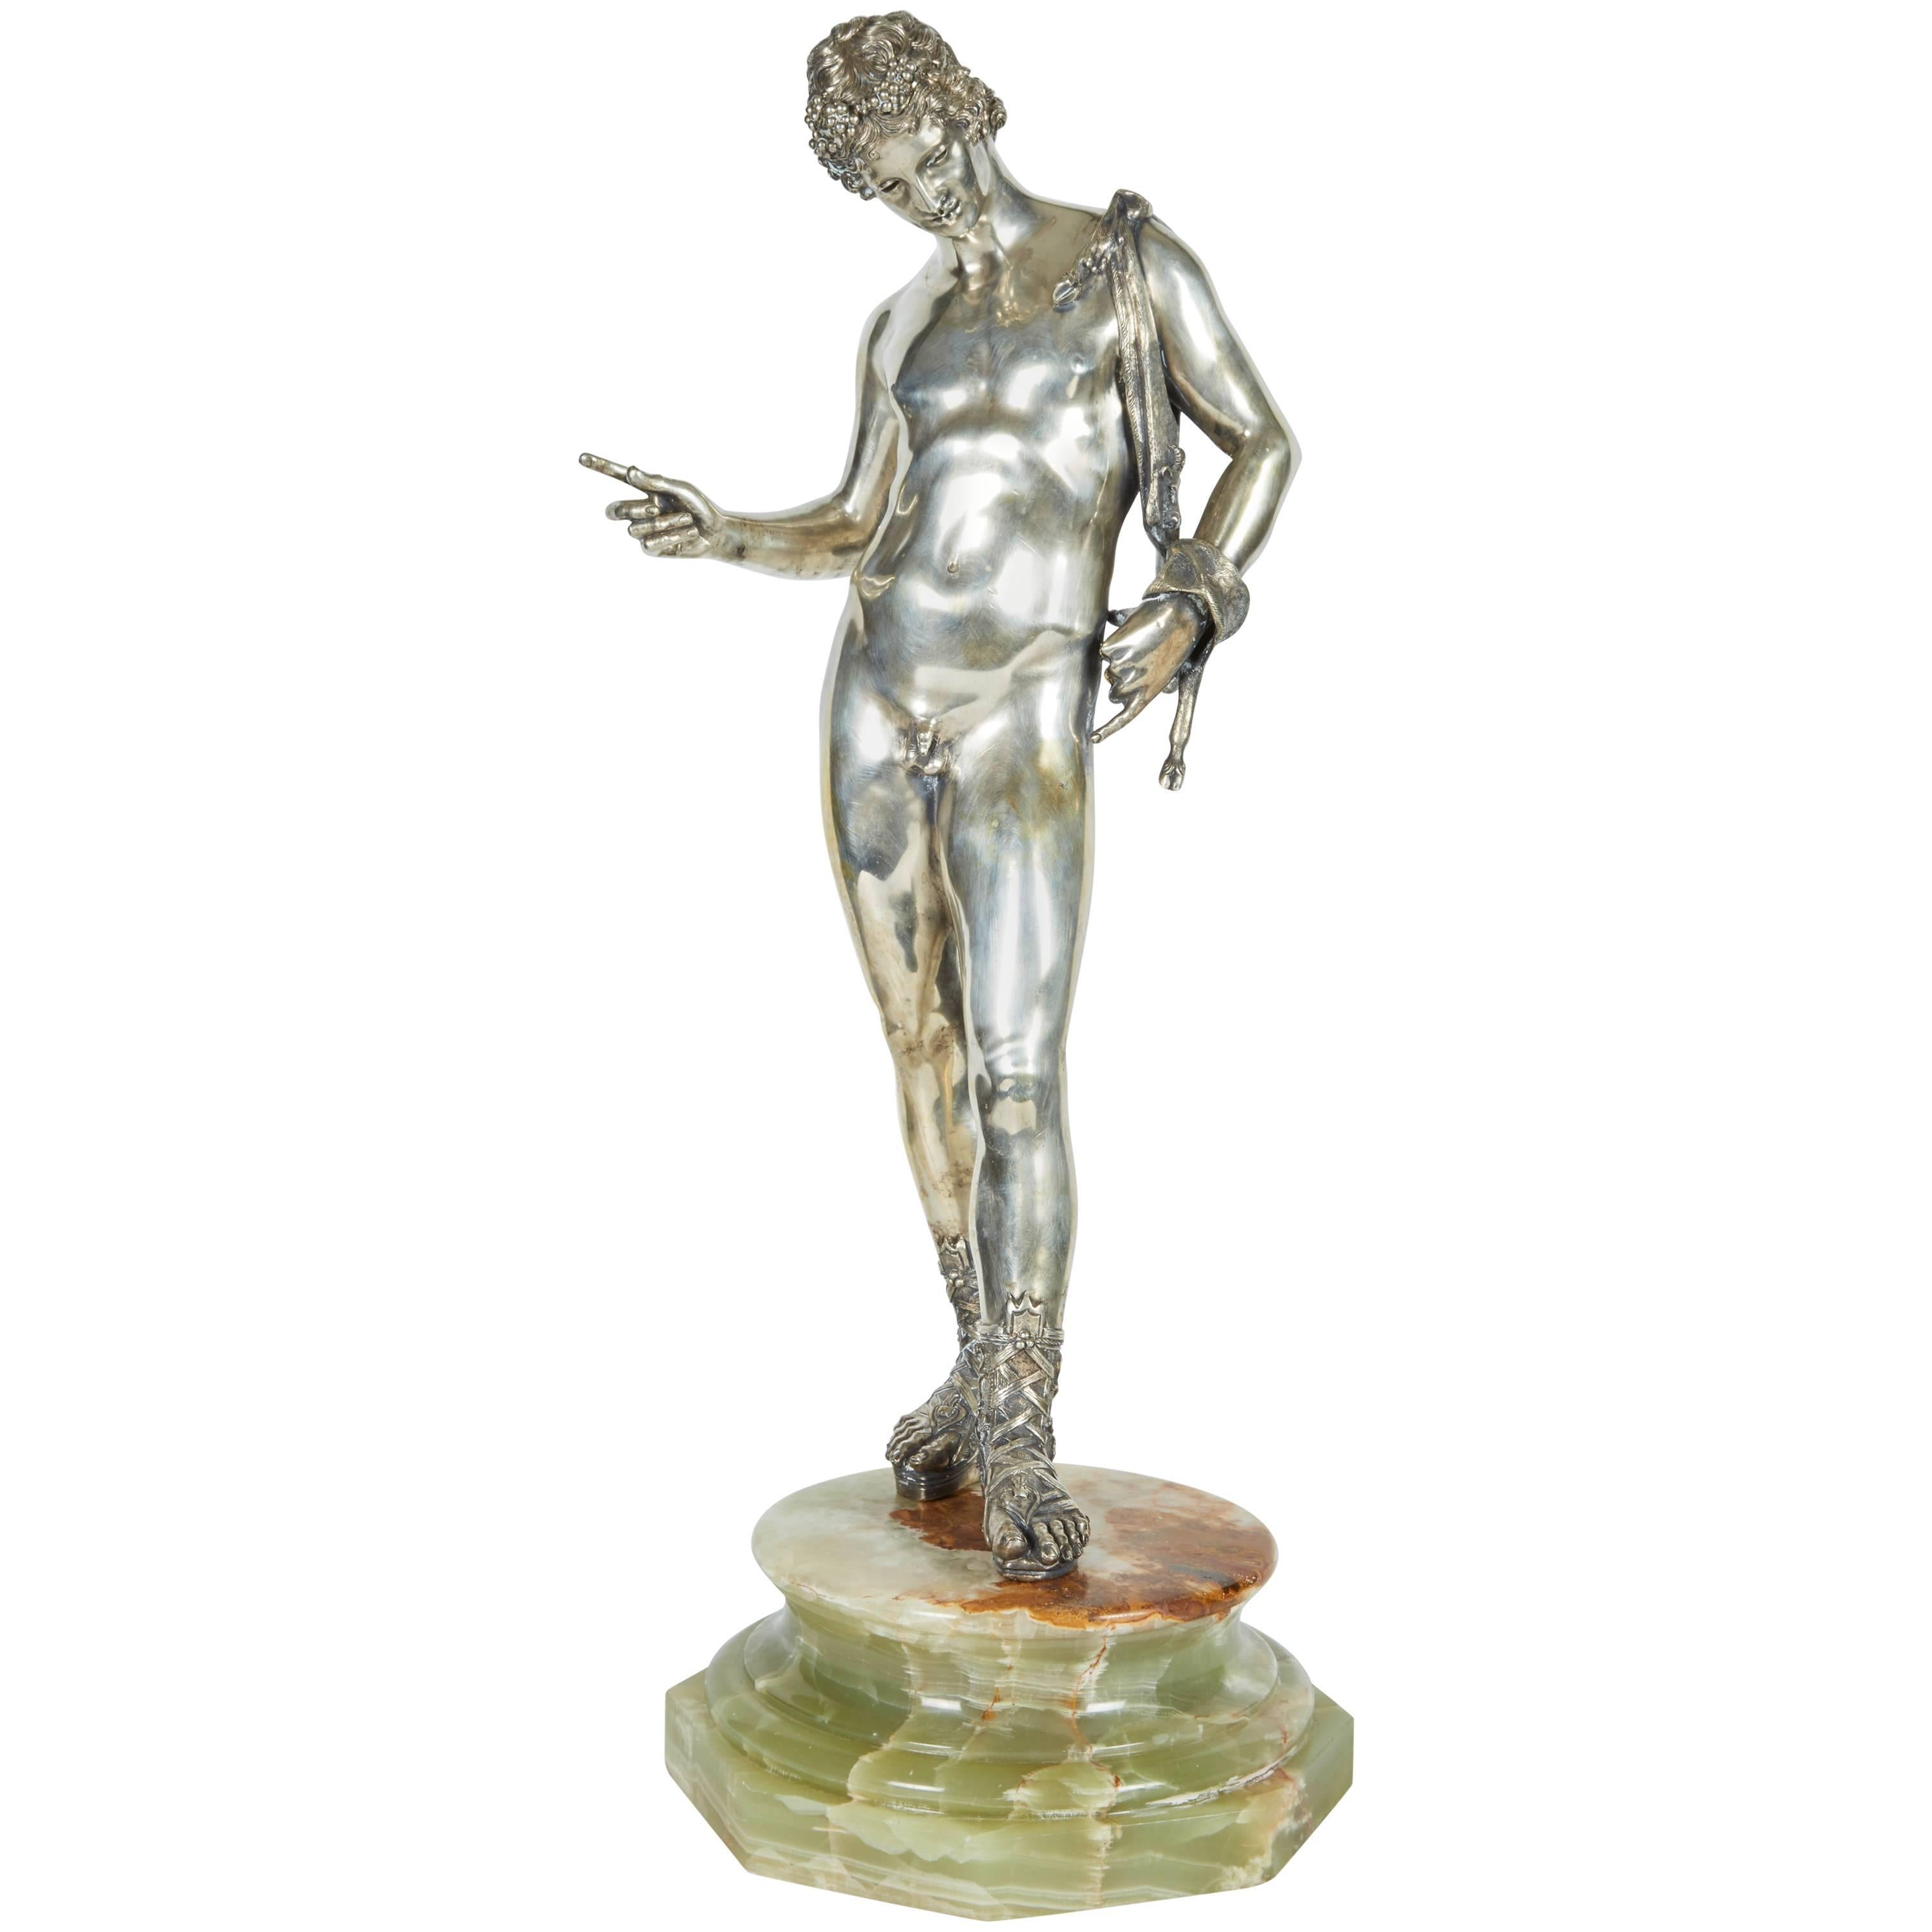 Large Italian Silver Figure / Statue of a Male Nude Narcissus after the Antique